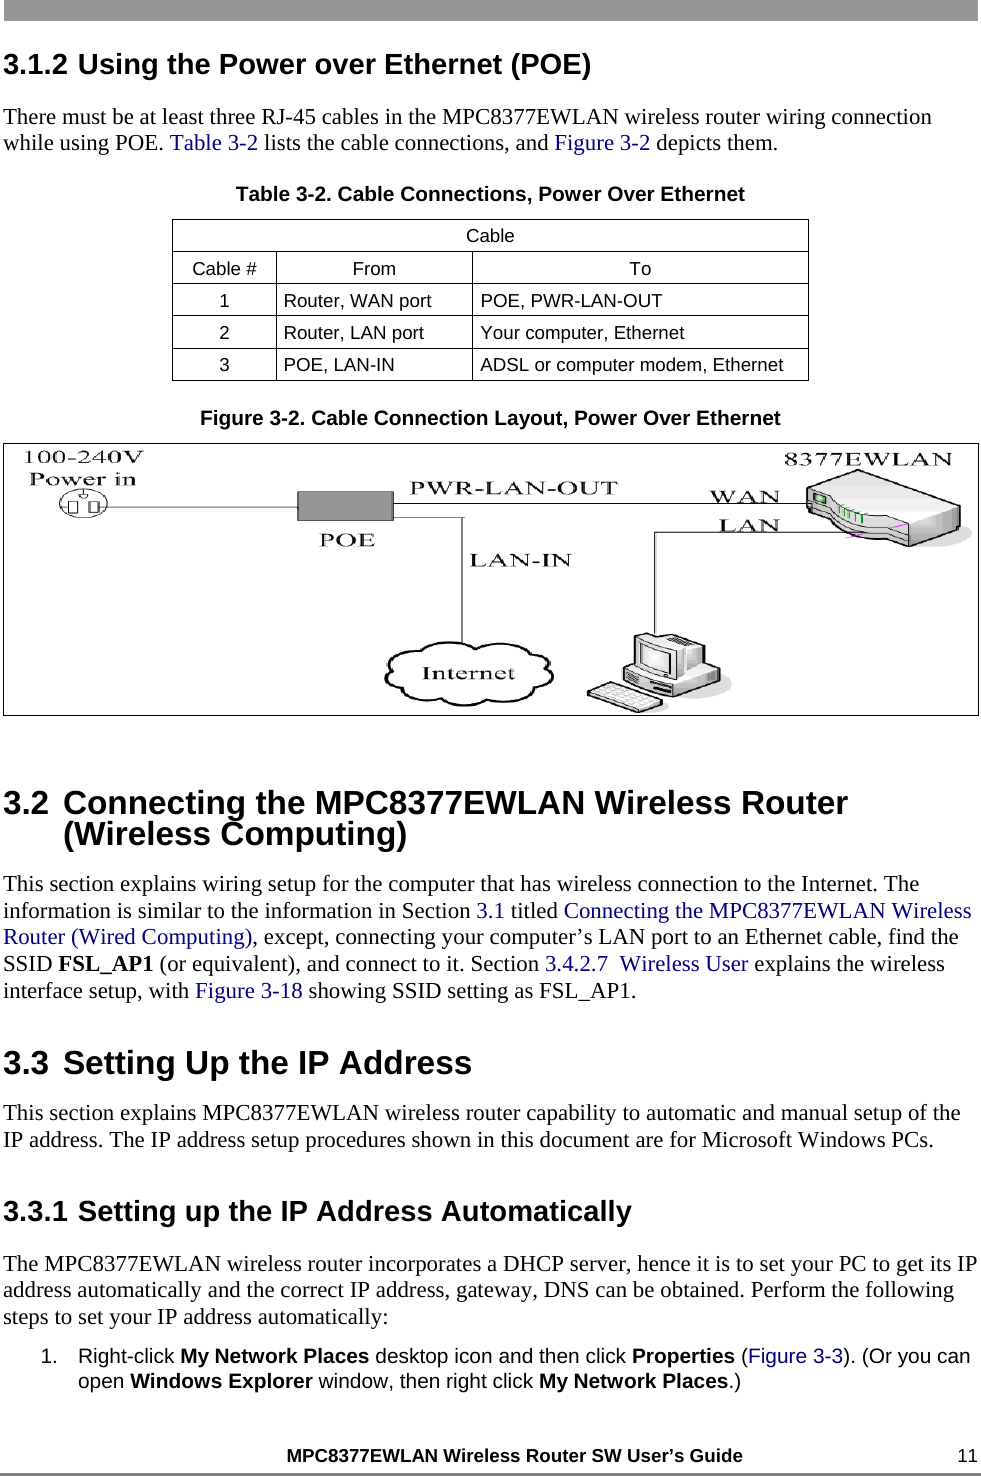                                                          MPC8377EWLAN Wireless Router SW User’s Guide    11 3.1.2 Using the Power over Ethernet (POE) There must be at least three RJ-45 cables in the MPC8377EWLAN wireless router wiring connection while using POE. Table 3-2 lists the cable connections, and Figure 3-2 depicts them. Table 3-2. Cable Connections, Power Over Ethernet Cable Cable #  From  To 1  Router, WAN port  POE, PWR-LAN-OUT 2  Router, LAN port  Your computer, Ethernet 3  POE, LAN-IN  ADSL or computer modem, Ethernet Figure 3-2. Cable Connection Layout, Power Over Ethernet  3.2 Connecting the MPC8377EWLAN Wireless Router (Wireless Computing) This section explains wiring setup for the computer that has wireless connection to the Internet. The information is similar to the information in Section 3.1 titled Connecting the MPC8377EWLAN Wireless Router (Wired Computing), except, connecting your computer’s LAN port to an Ethernet cable, find the SSID FSL_AP1 (or equivalent), and connect to it. Section 3.4.2.7  Wireless User explains the wireless interface setup, with Figure 3-18 showing SSID setting as FSL_AP1. 3.3 Setting Up the IP Address This section explains MPC8377EWLAN wireless router capability to automatic and manual setup of the IP address. The IP address setup procedures shown in this document are for Microsoft Windows PCs. 3.3.1 Setting up the IP Address Automatically The MPC8377EWLAN wireless router incorporates a DHCP server, hence it is to set your PC to get its IP address automatically and the correct IP address, gateway, DNS can be obtained. Perform the following steps to set your IP address automatically:  1. Right-click My Network Places desktop icon and then click Properties (Figure 3-3). (Or you can open Windows Explorer window, then right click My Network Places.) 